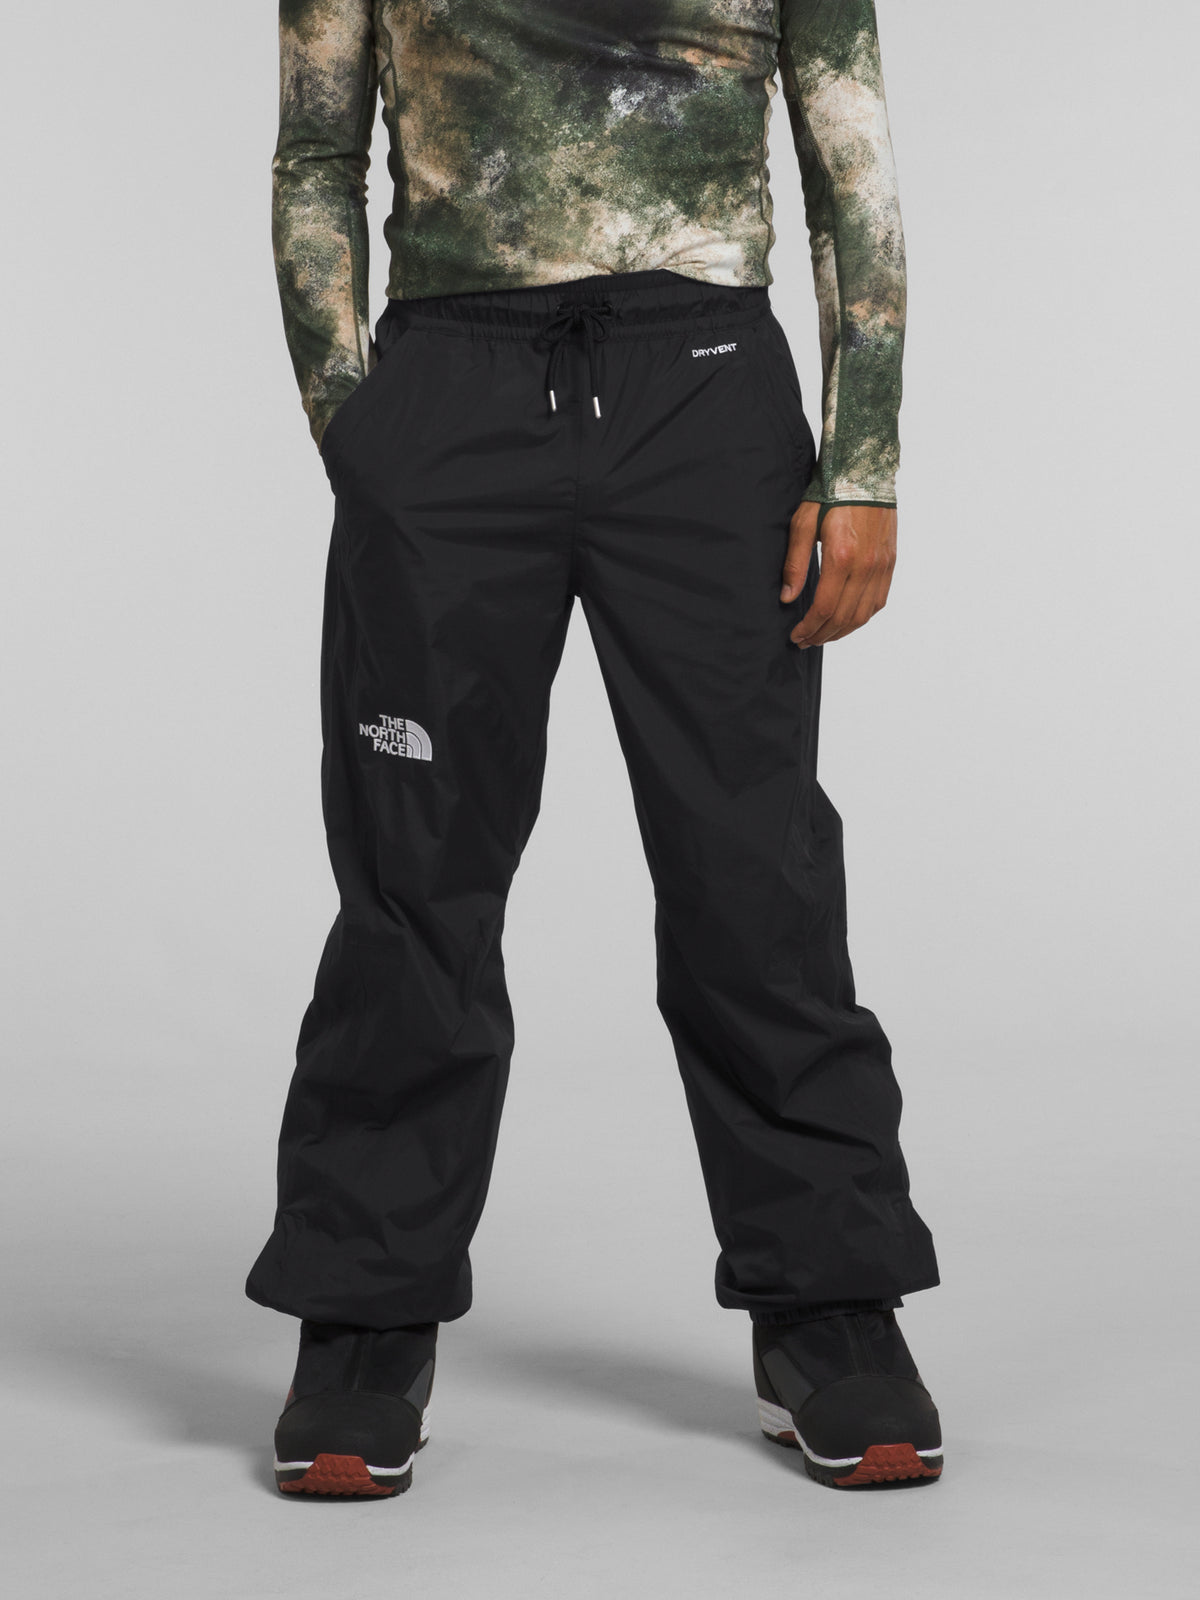 The North Face Mens BUILD UP PANT